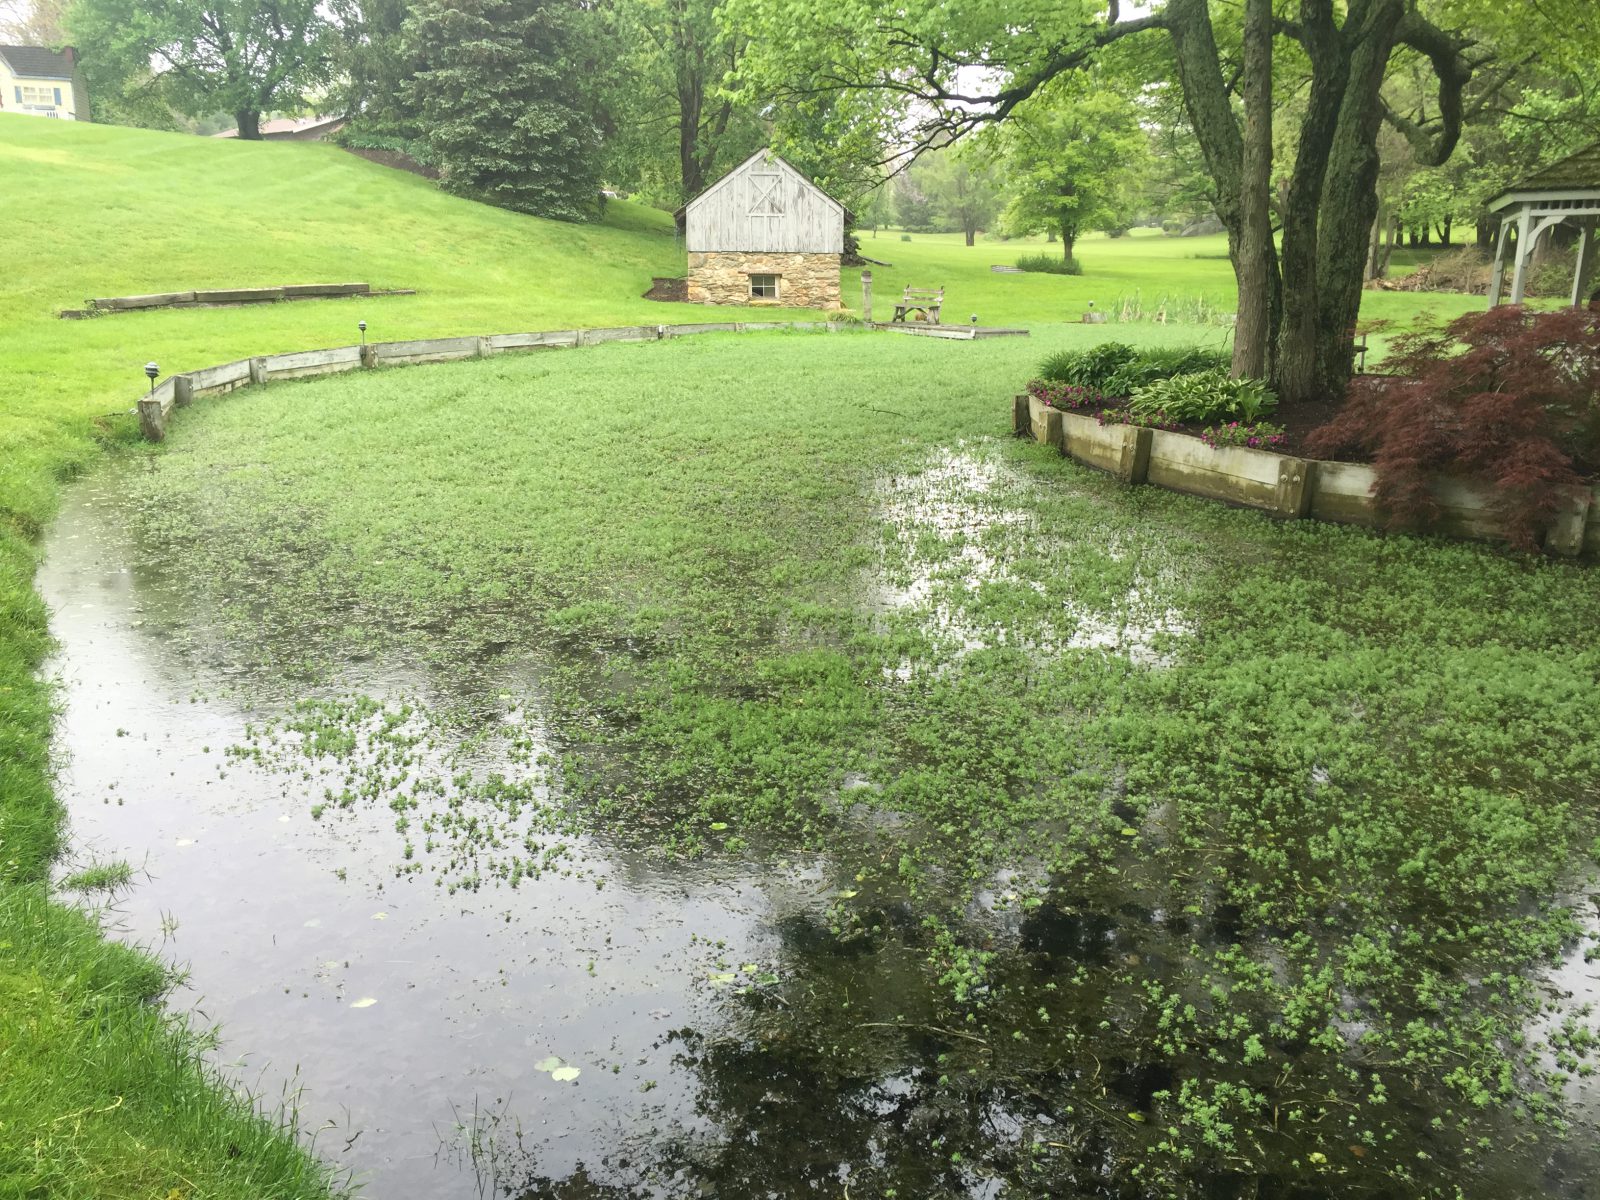 Before_Parrotfeather Management invasive aquatic species control and pond weed treatment